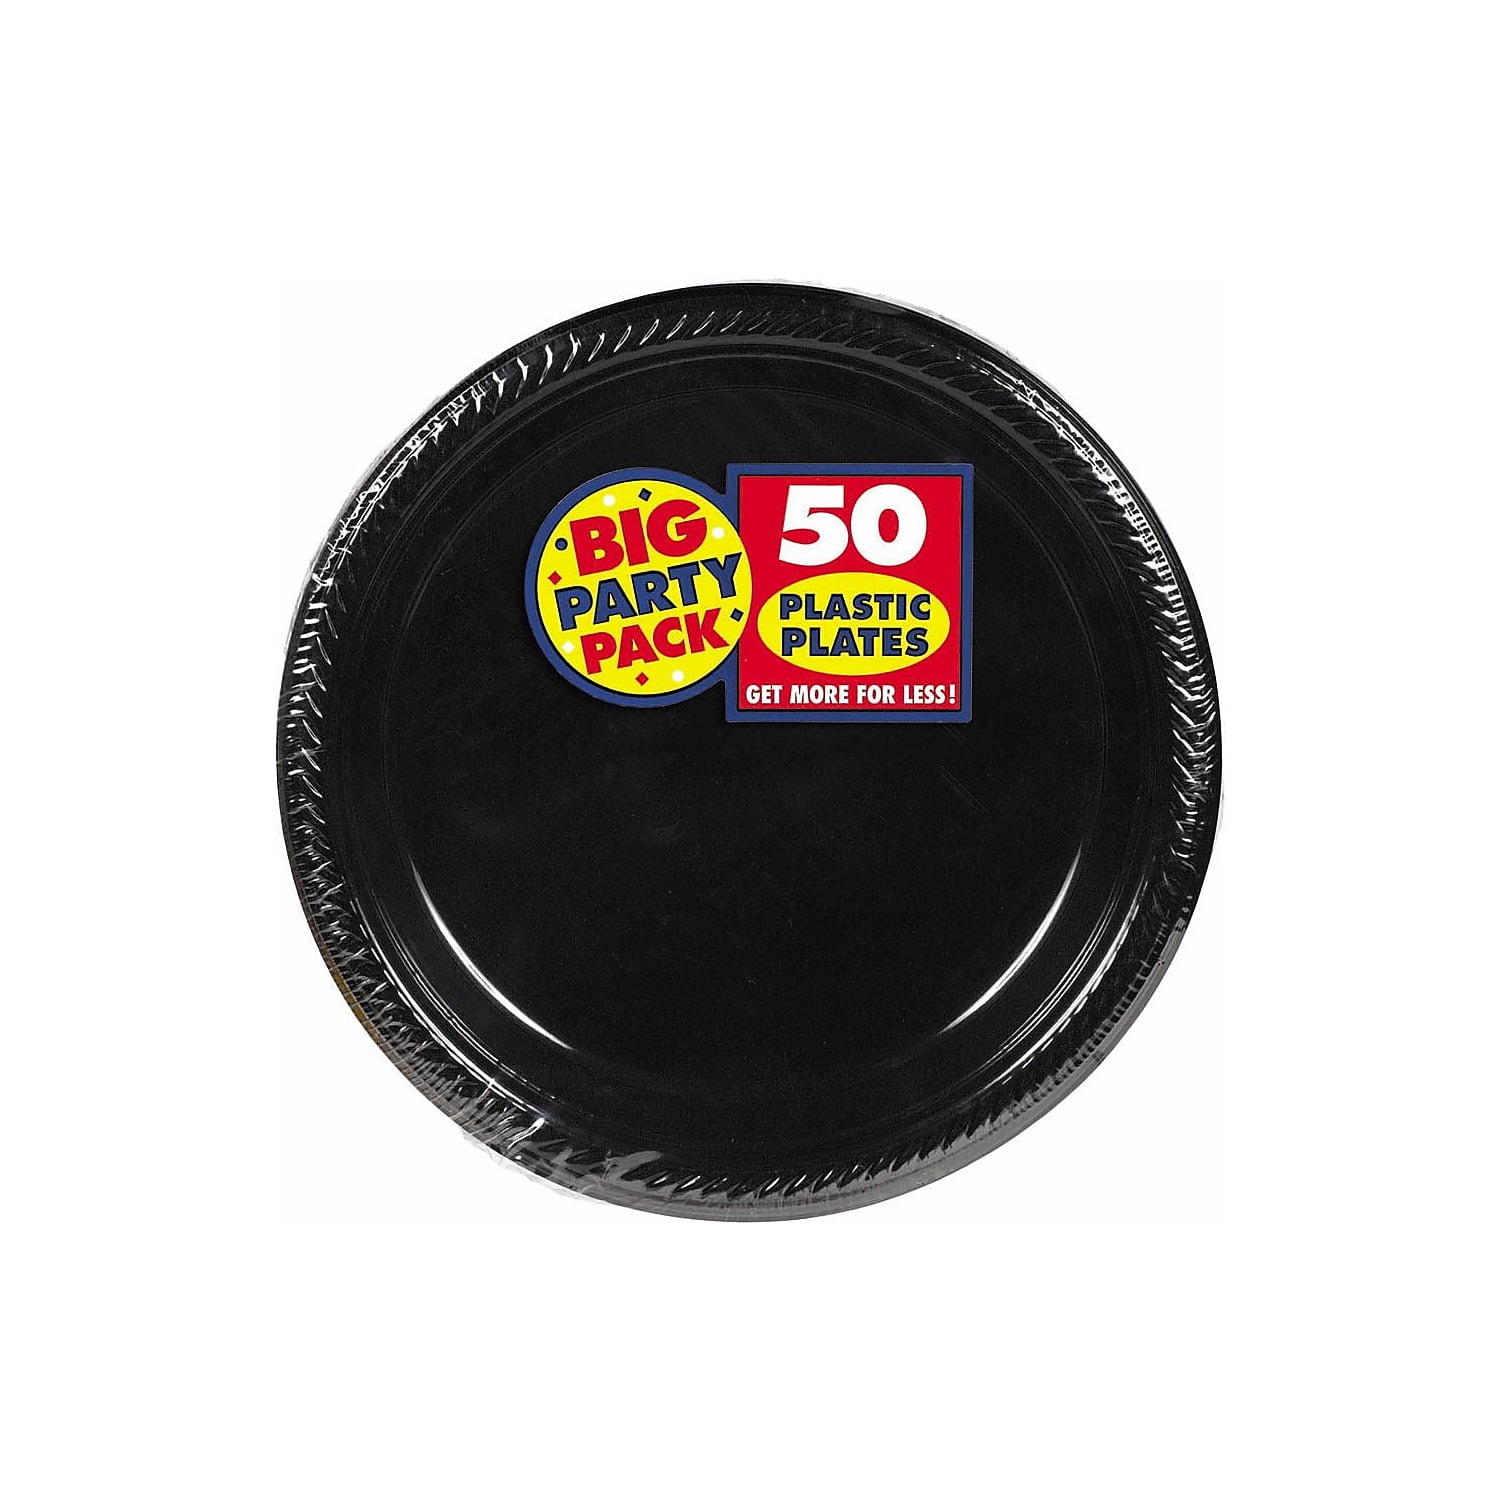 Disposable Plastic Plates Black, 7 Inches Plastic Dessert Plates, Strong  and Sturdy Disposable Plates for Party, Dinner, Holiday, Picnic, or Travel  Party Plates, Pack of 50 - By Amcrate 